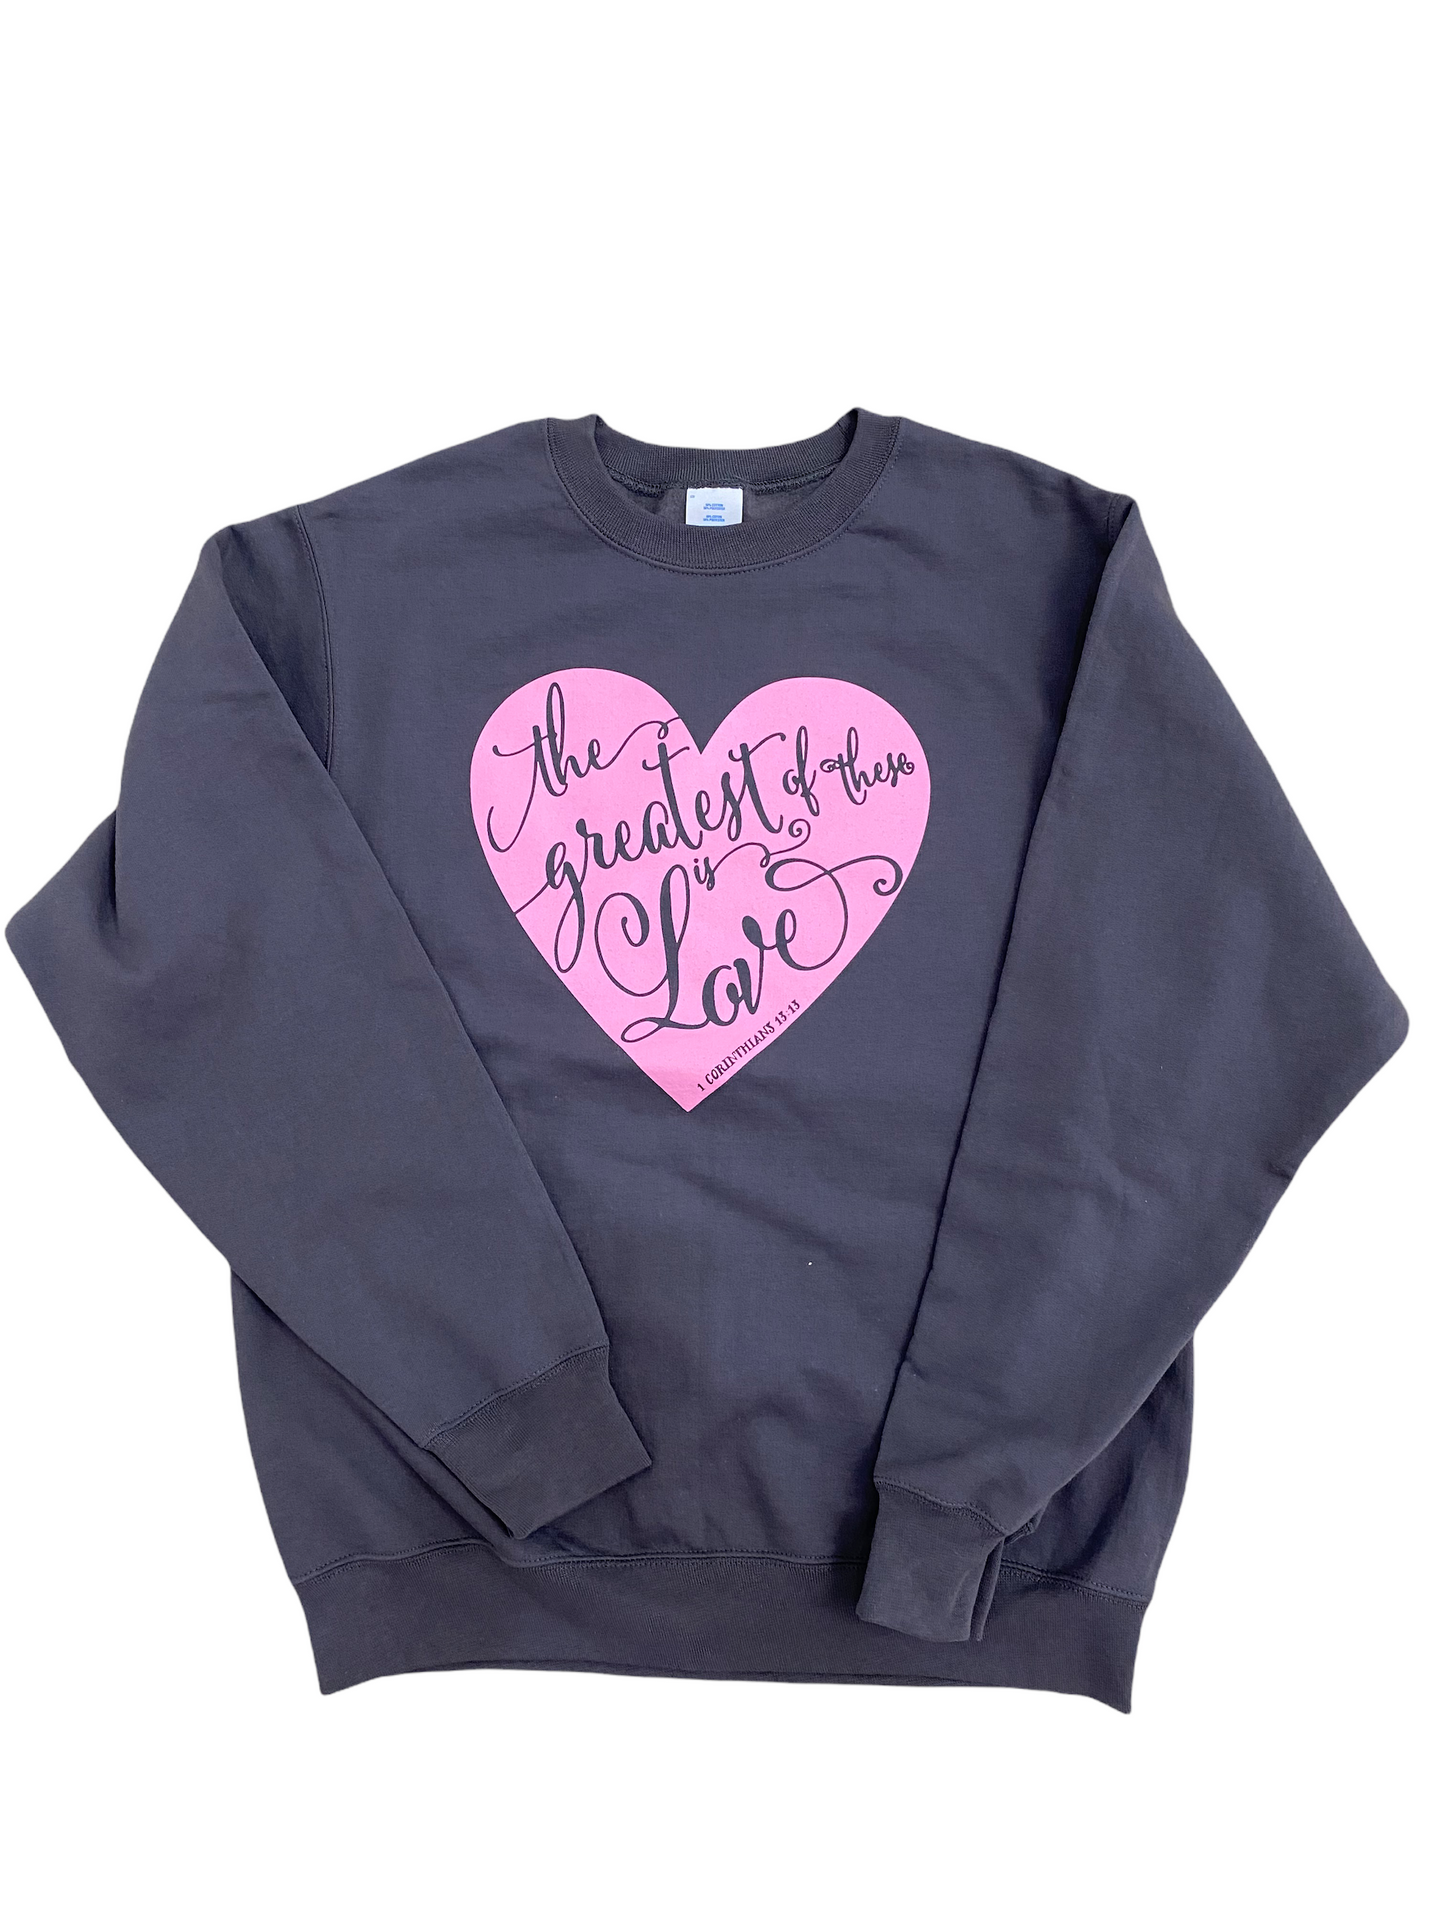 The Greatest of These is Love sweatshirt- Adults